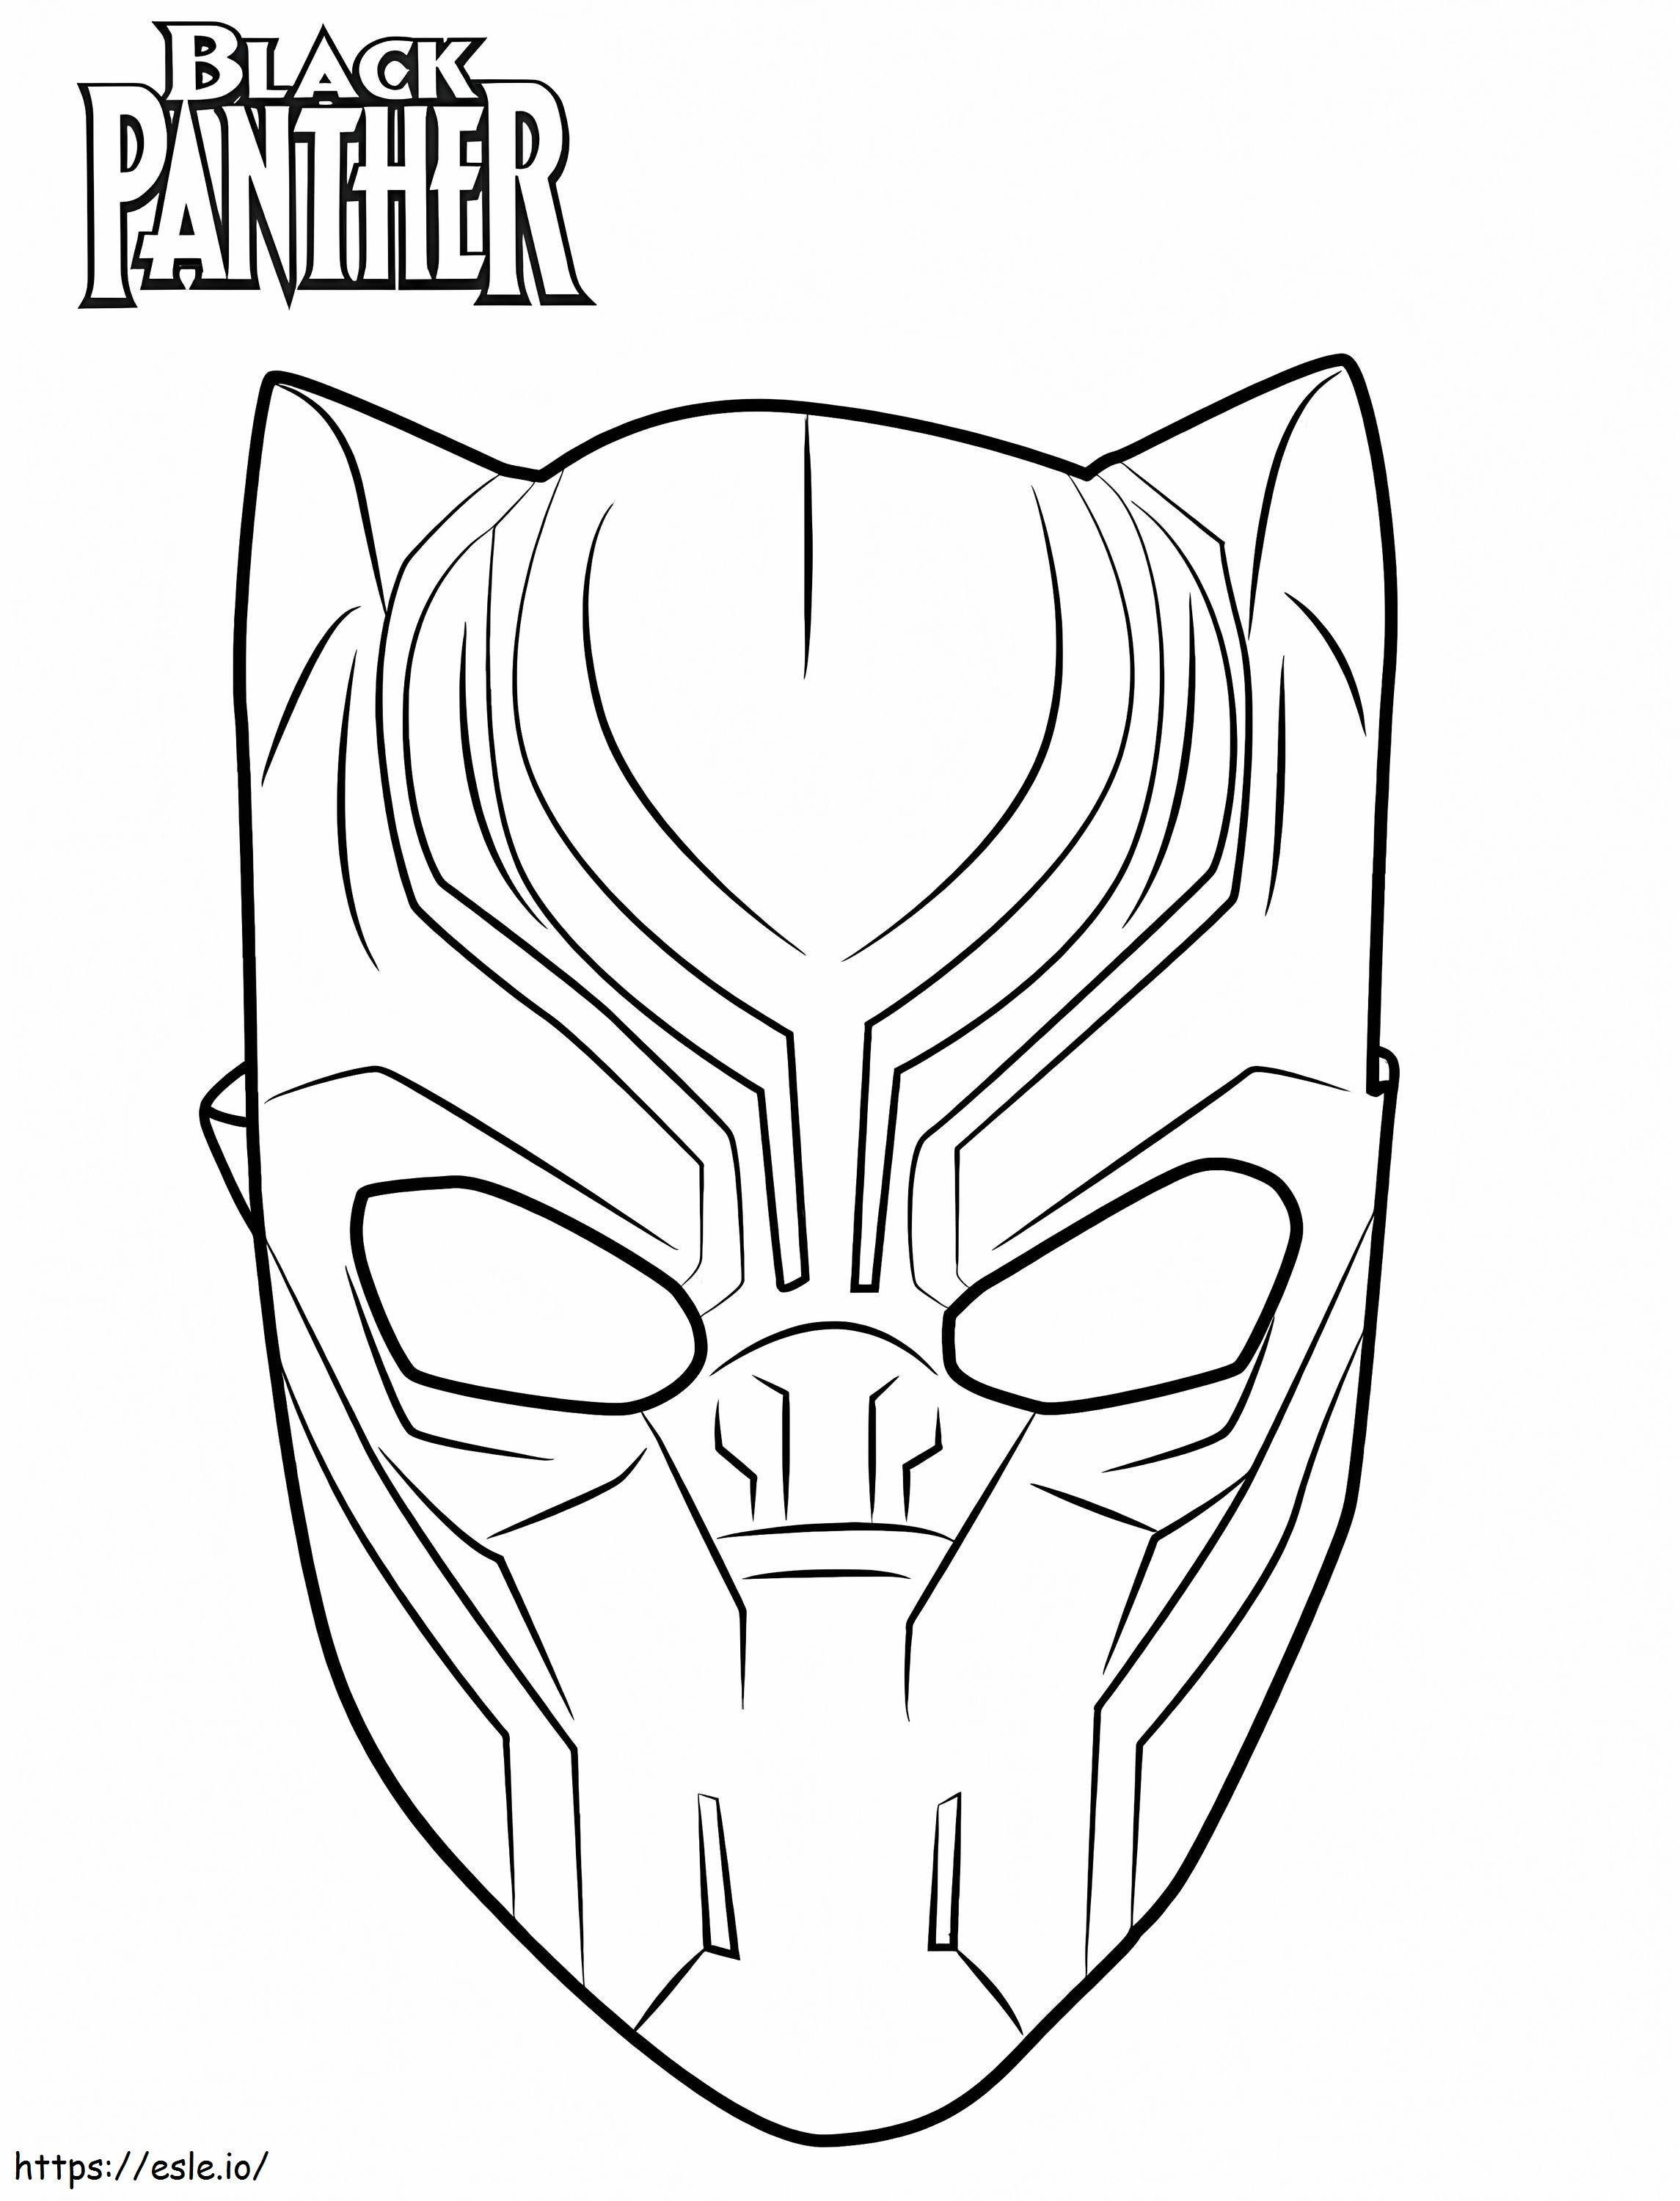 Black Panther Mask coloring page